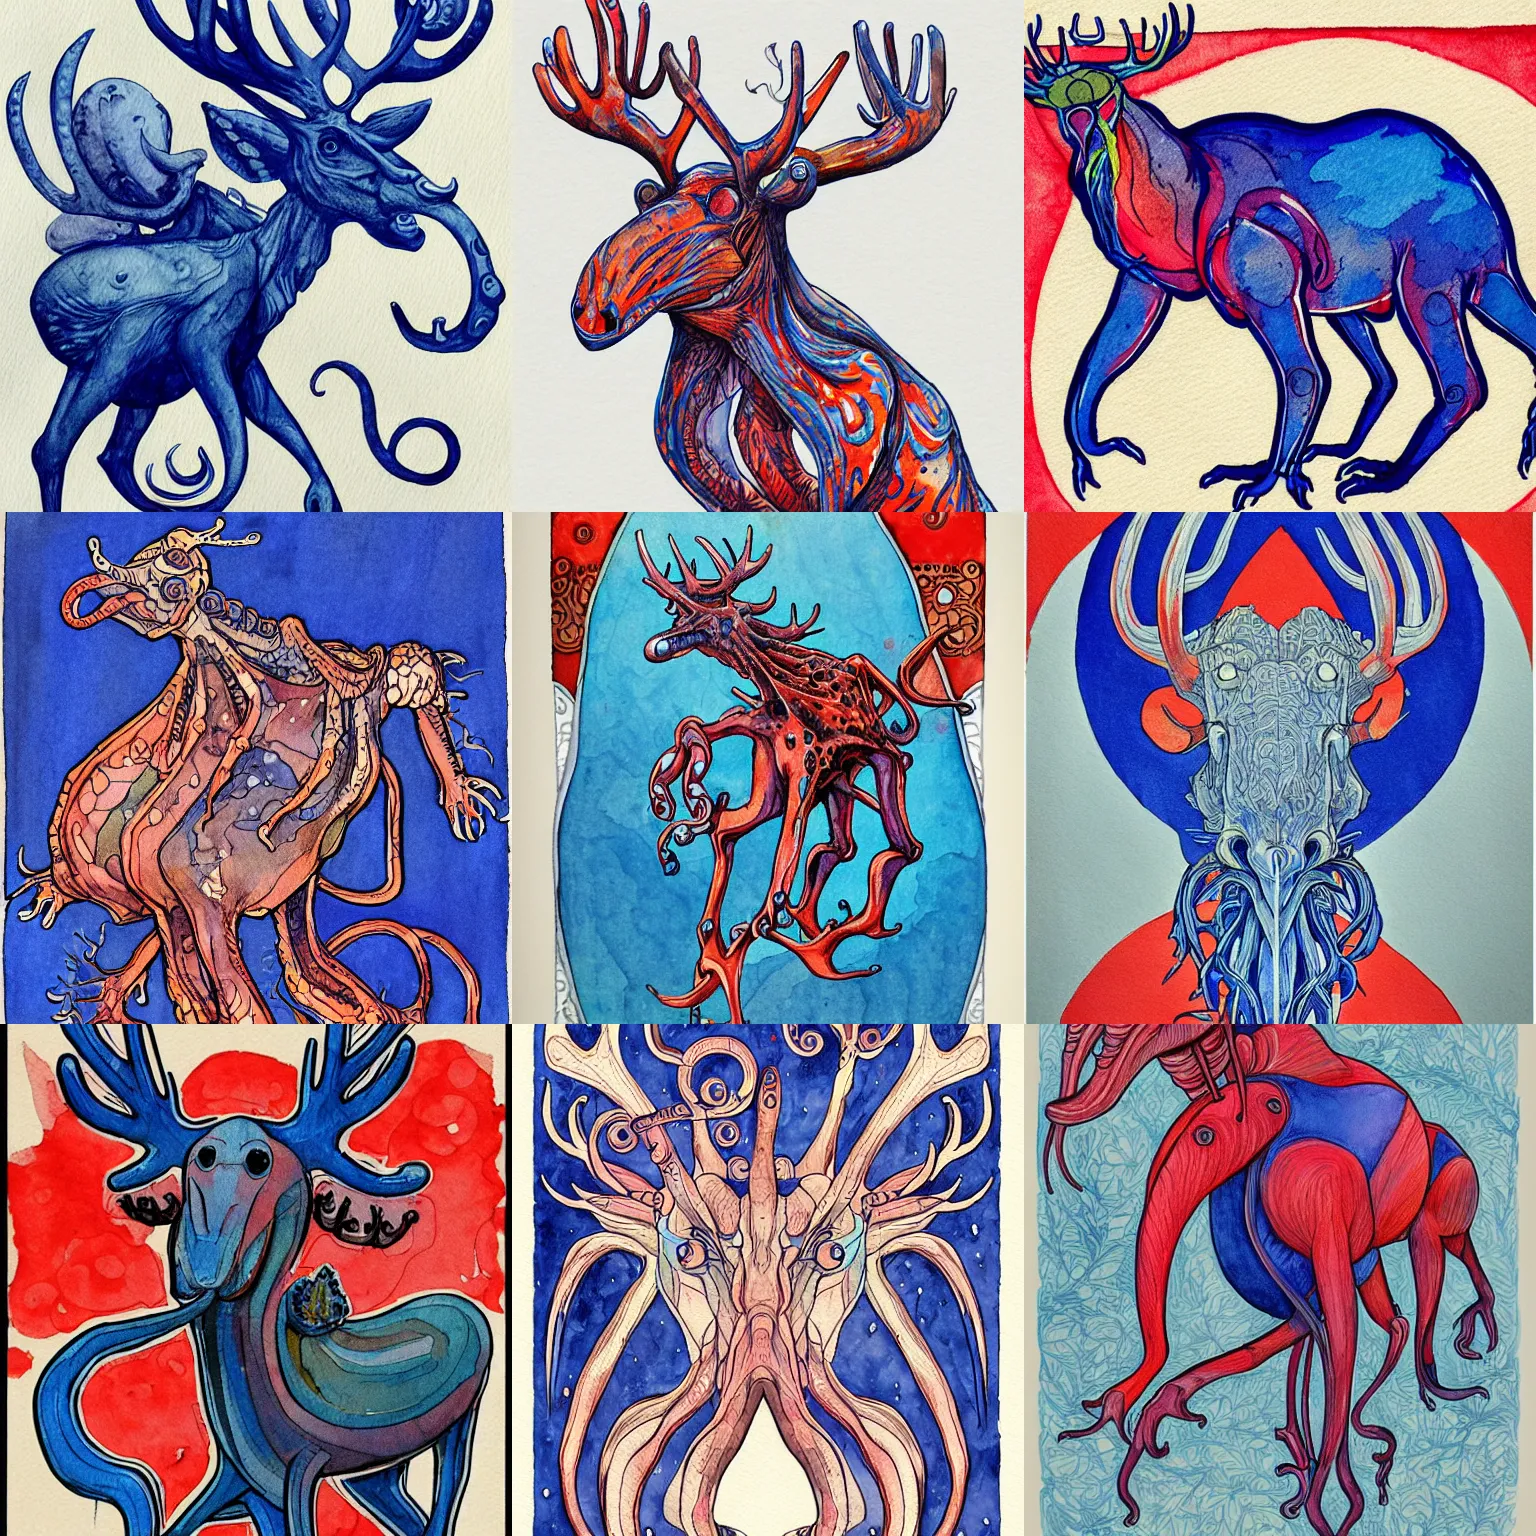 Prompt: octopod turkey - moose creature with four arms and long neck, arms growing from chest, pinchers | romanticist, art nouveau illustration, figurative art, loose linework, watercolor wash over inks, cadmium red, cobalt blue, payne's grey, luminism